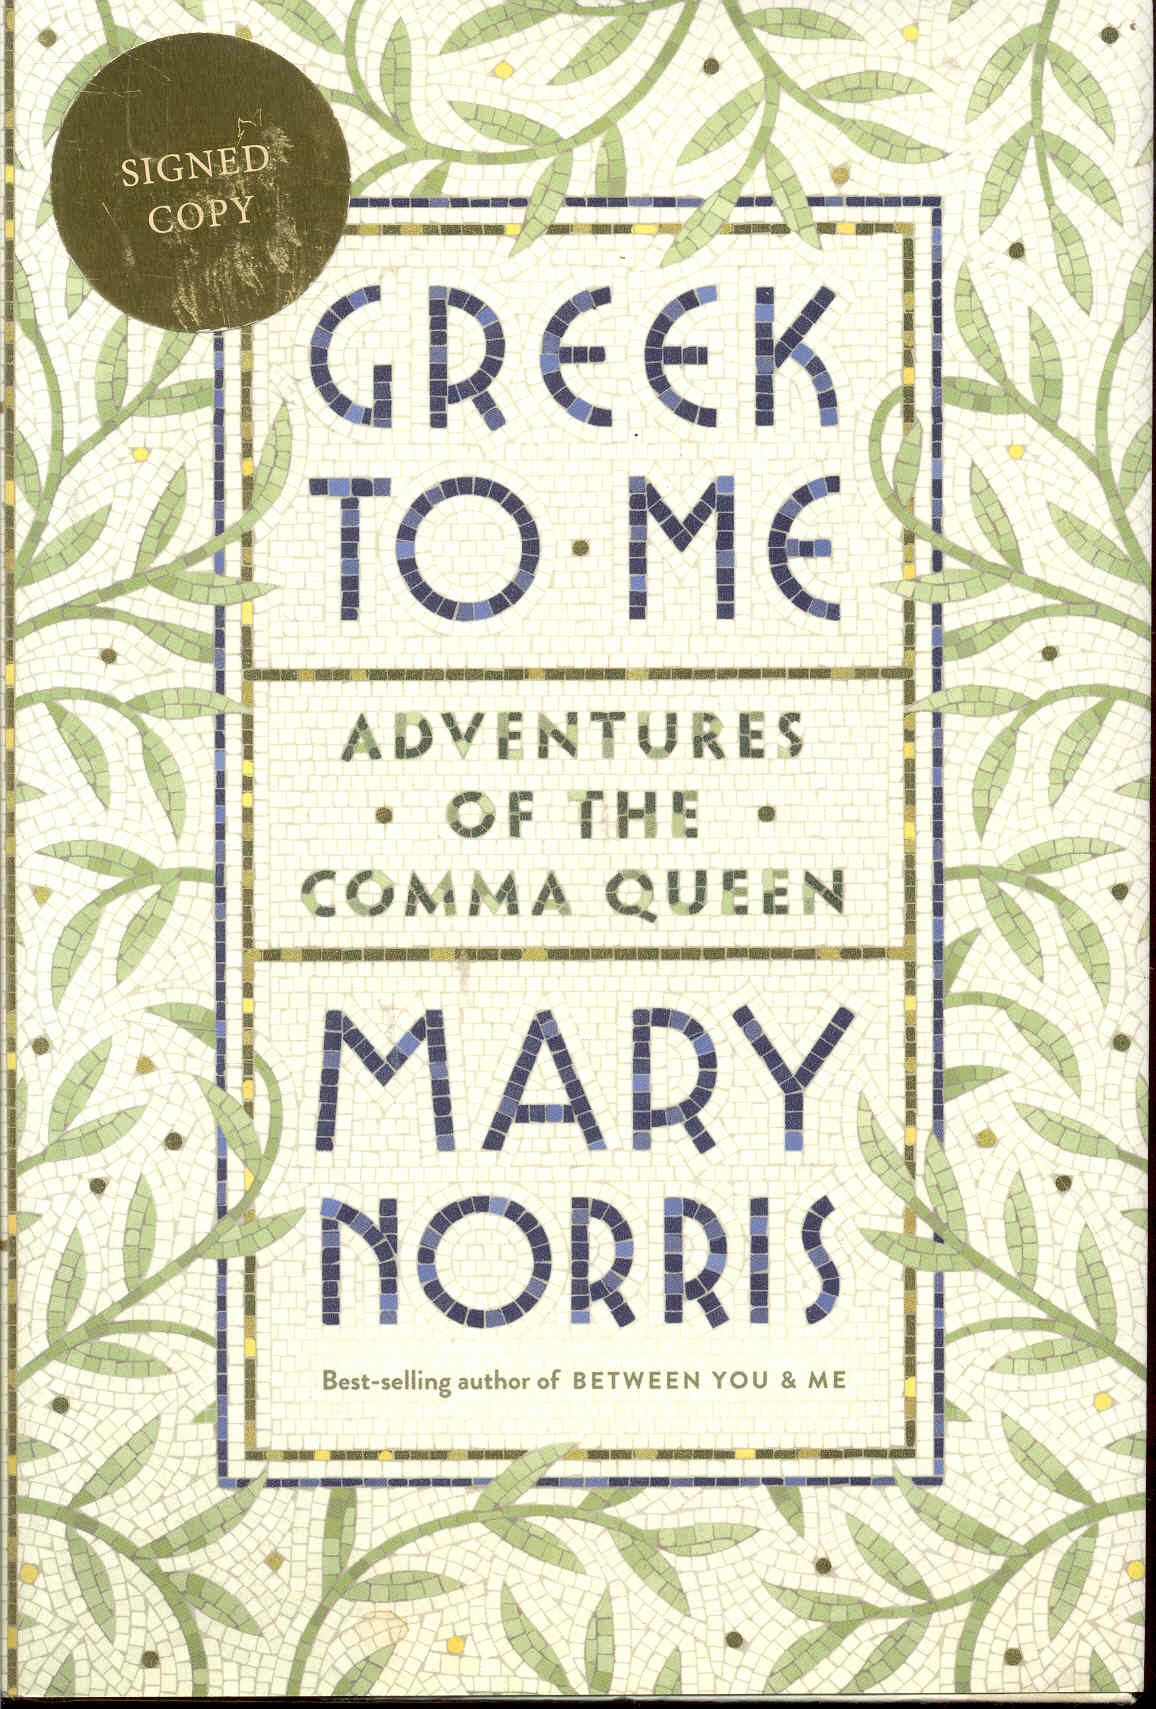 Greek to Me, by Mary Norris